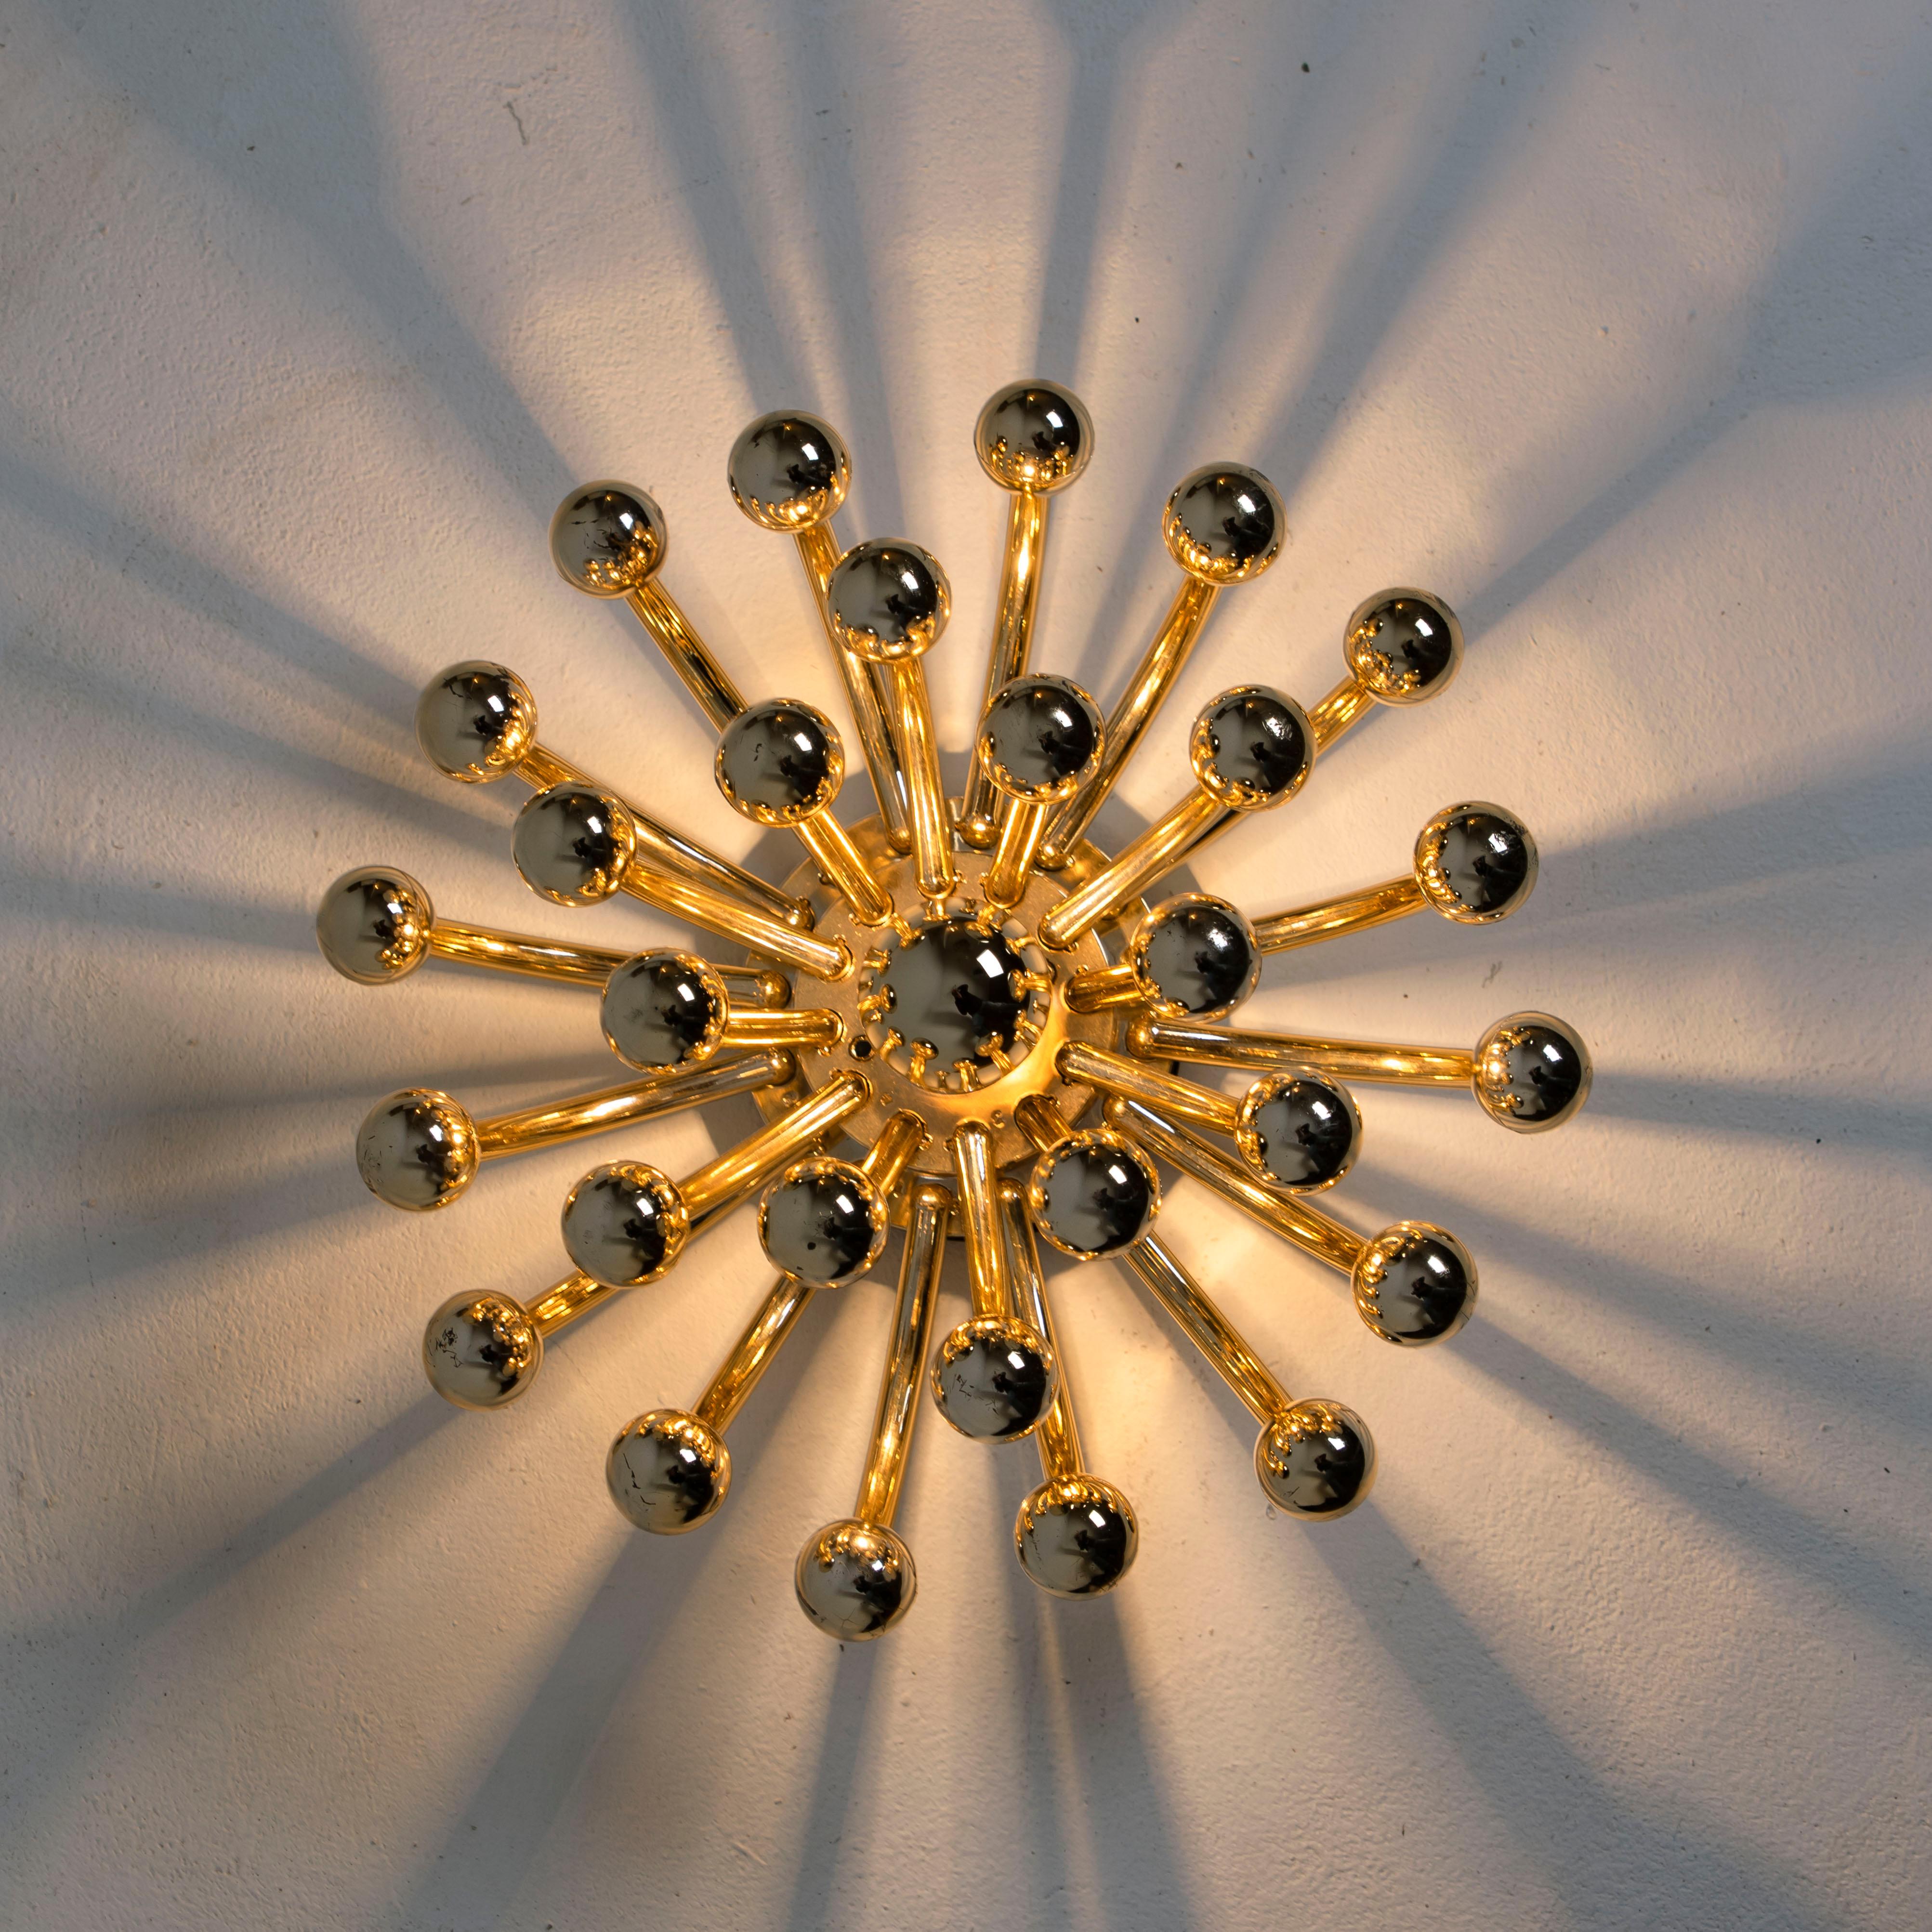 Pair of Valenti Luce Pistillino Wall Lights, Italy, 1970 For Sale 6